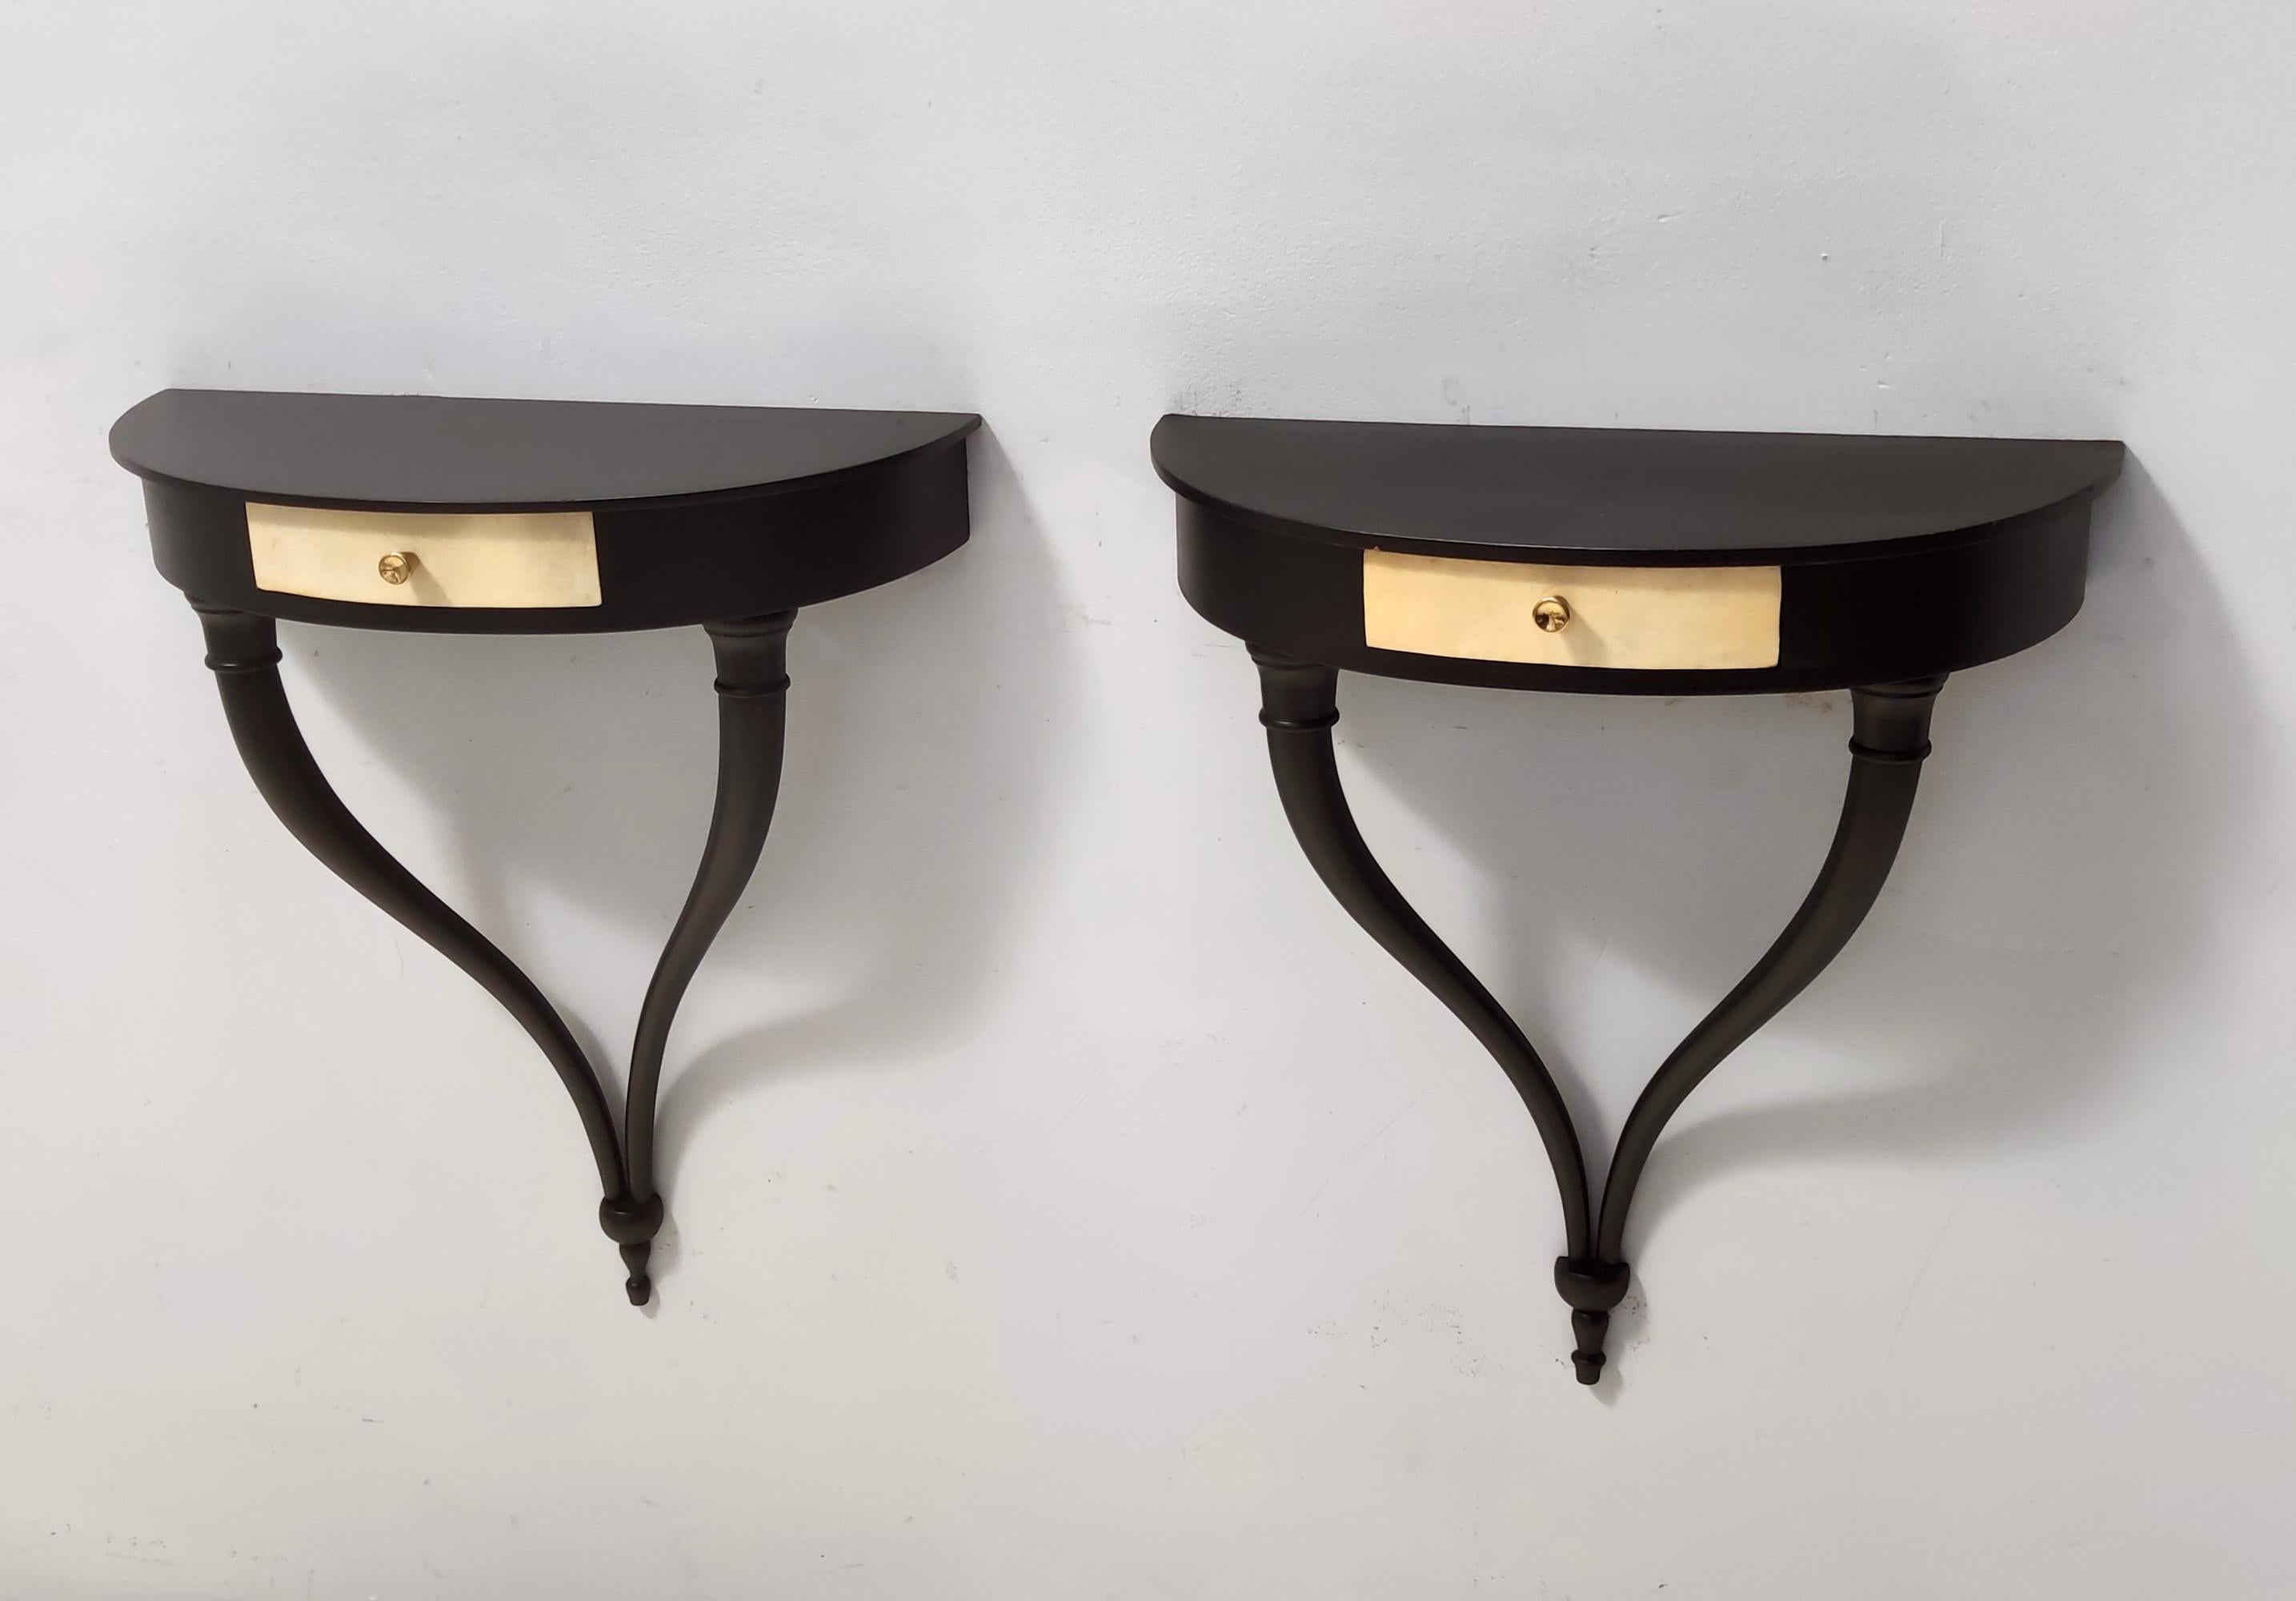 Italian Pair of Wall-Mounted Console Tables / Nightstands by Guglielmo Ulrich, Italy